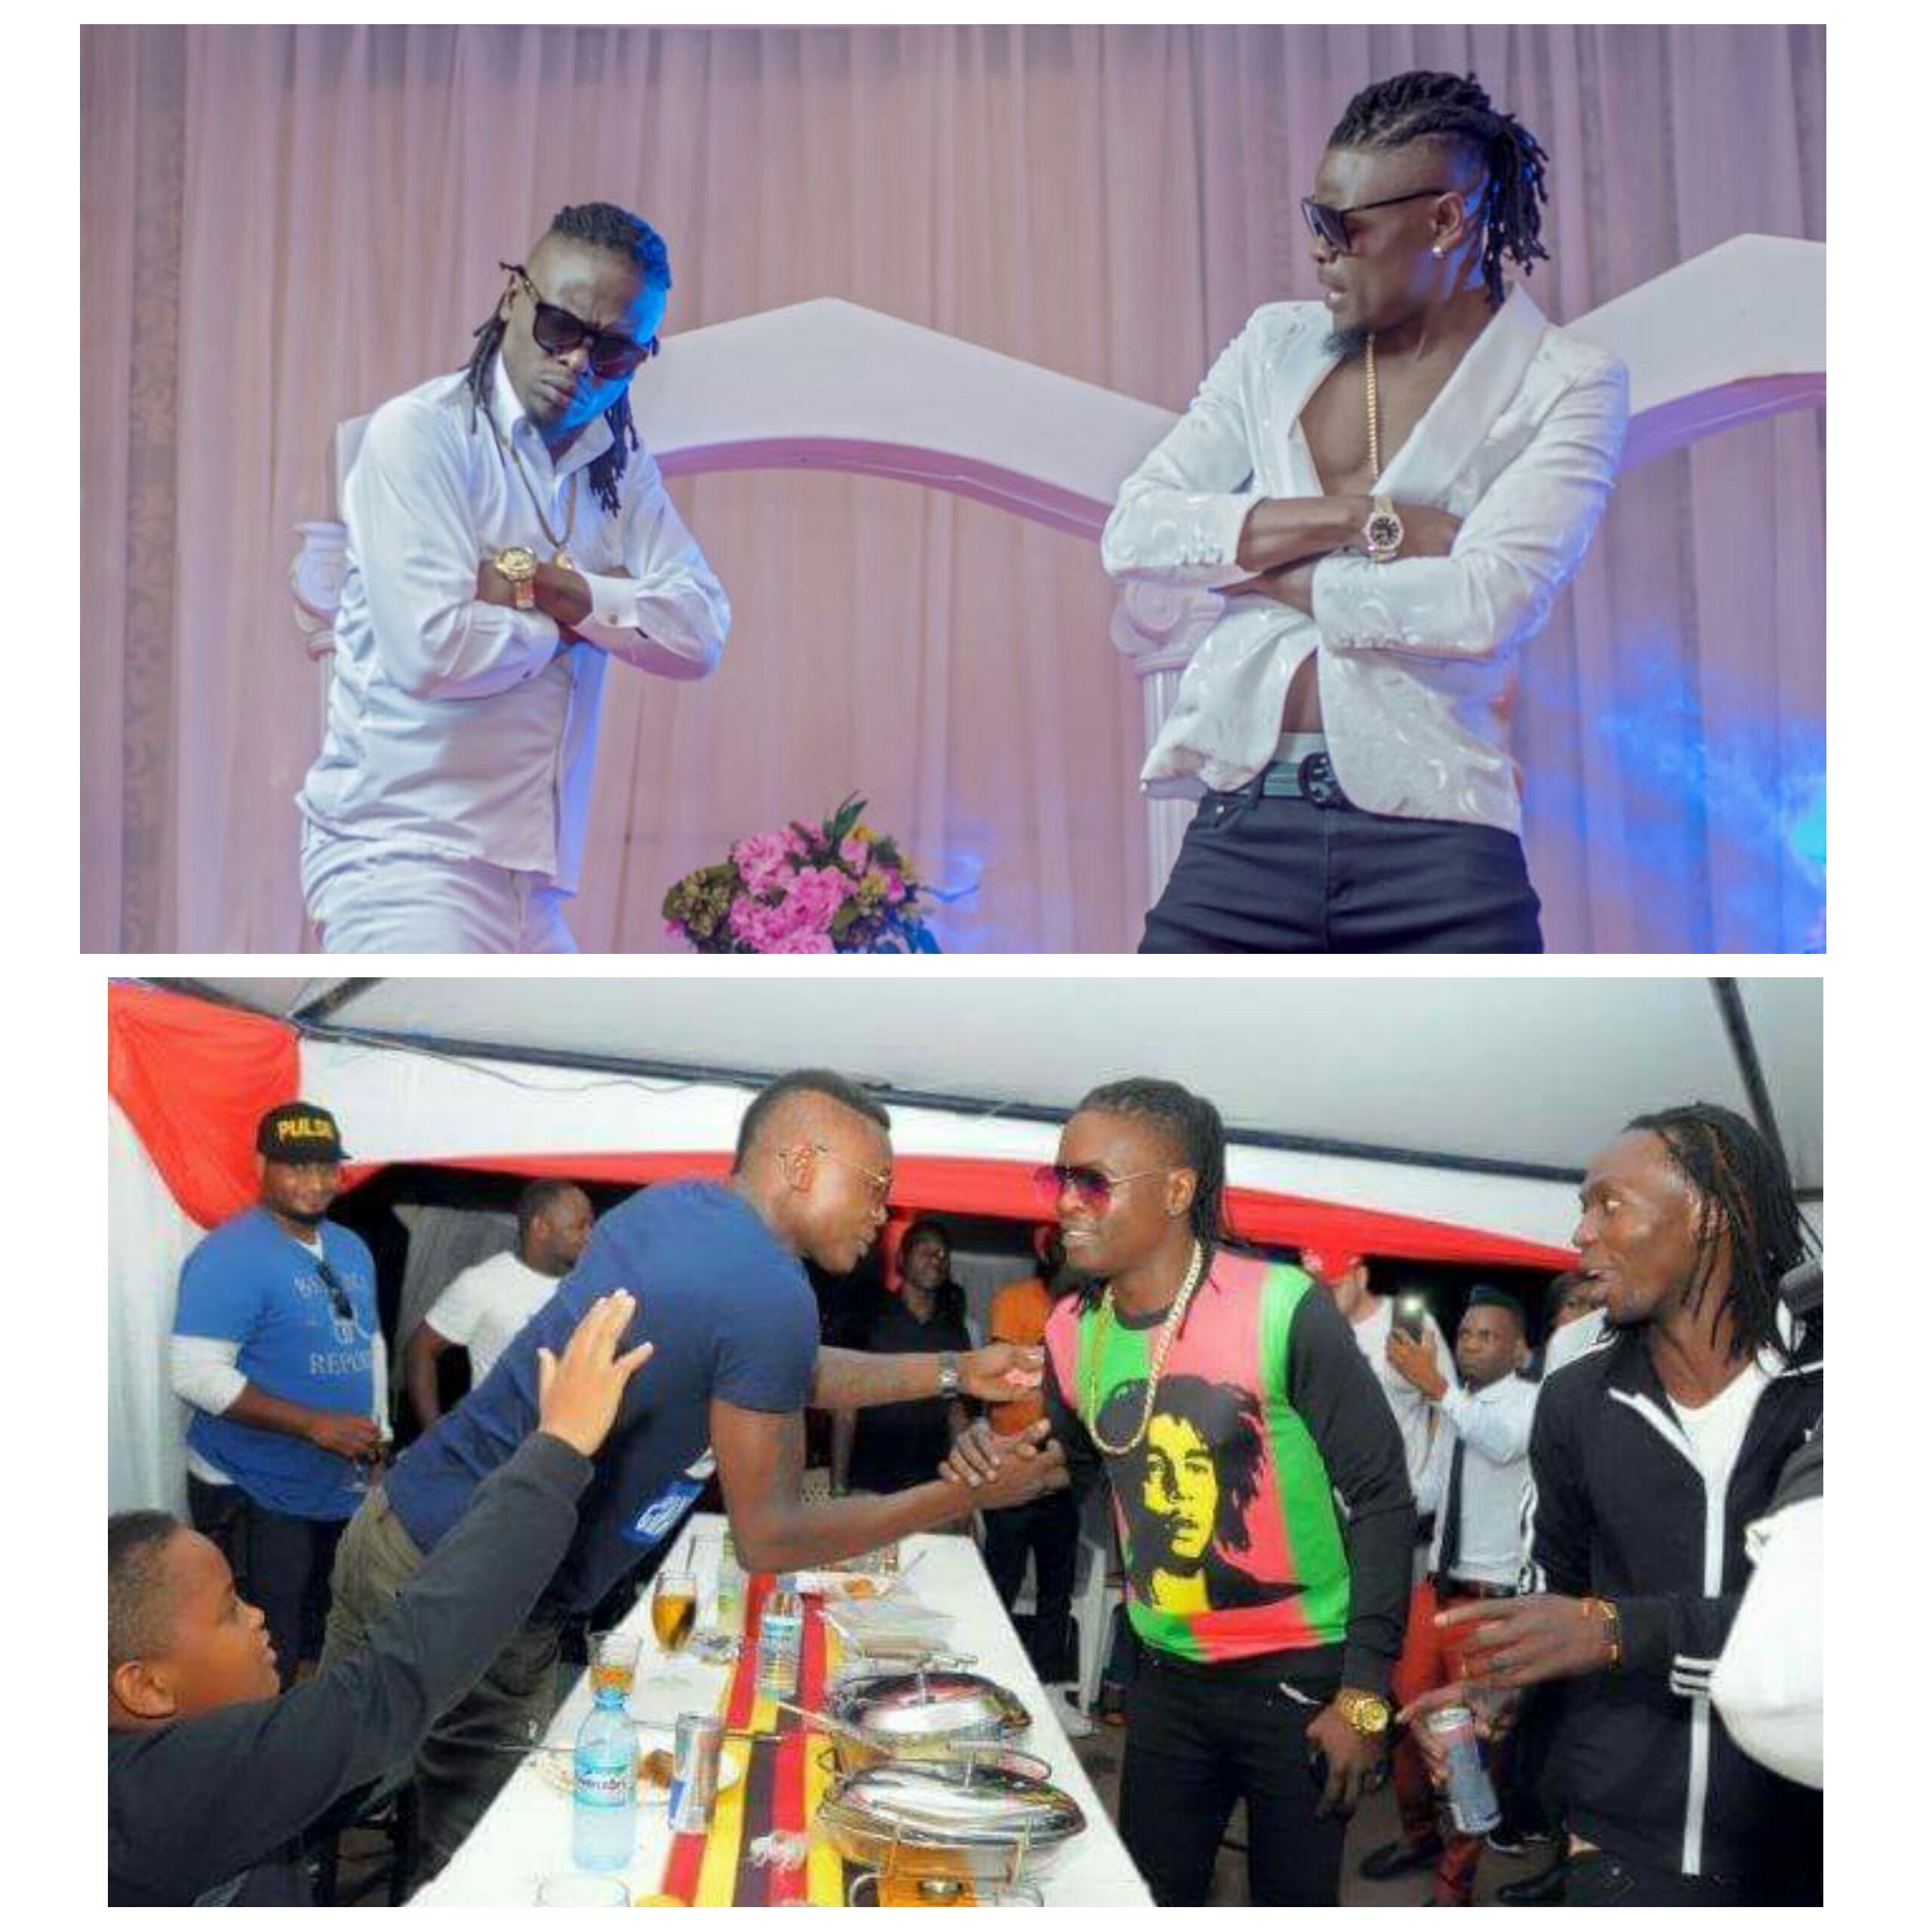 Jose Chameleone and Pallaso praise their Brother, Weasel on His Birthday